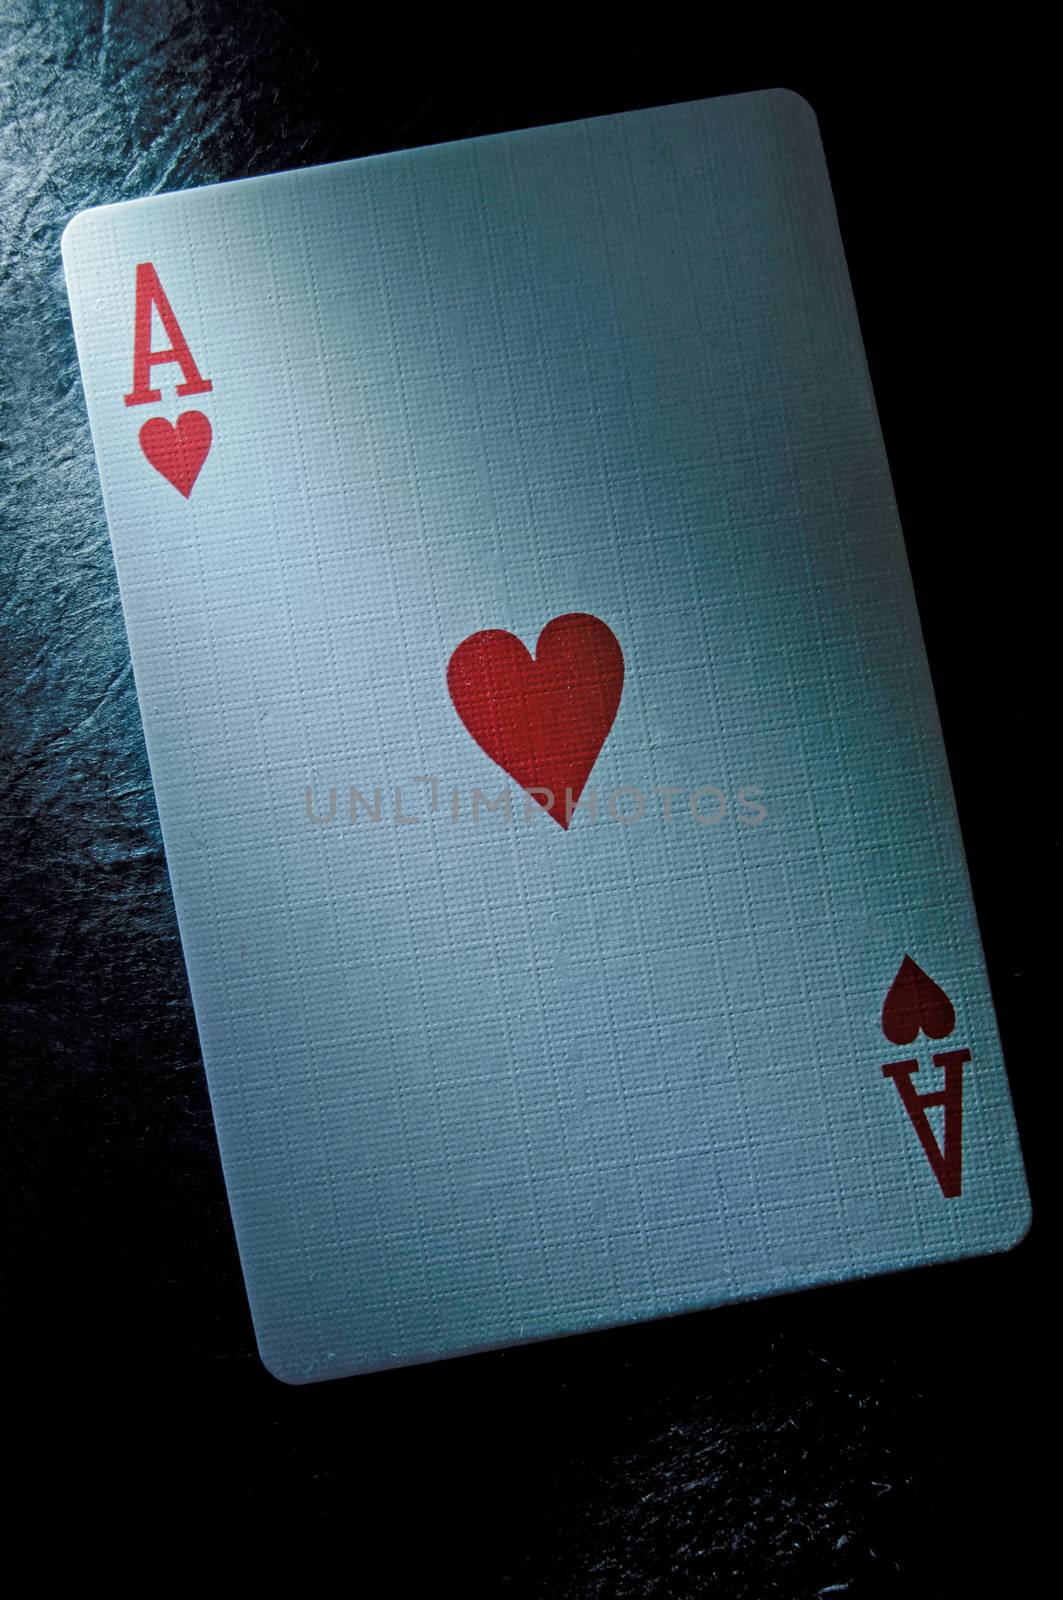 Ace of hearts playing card